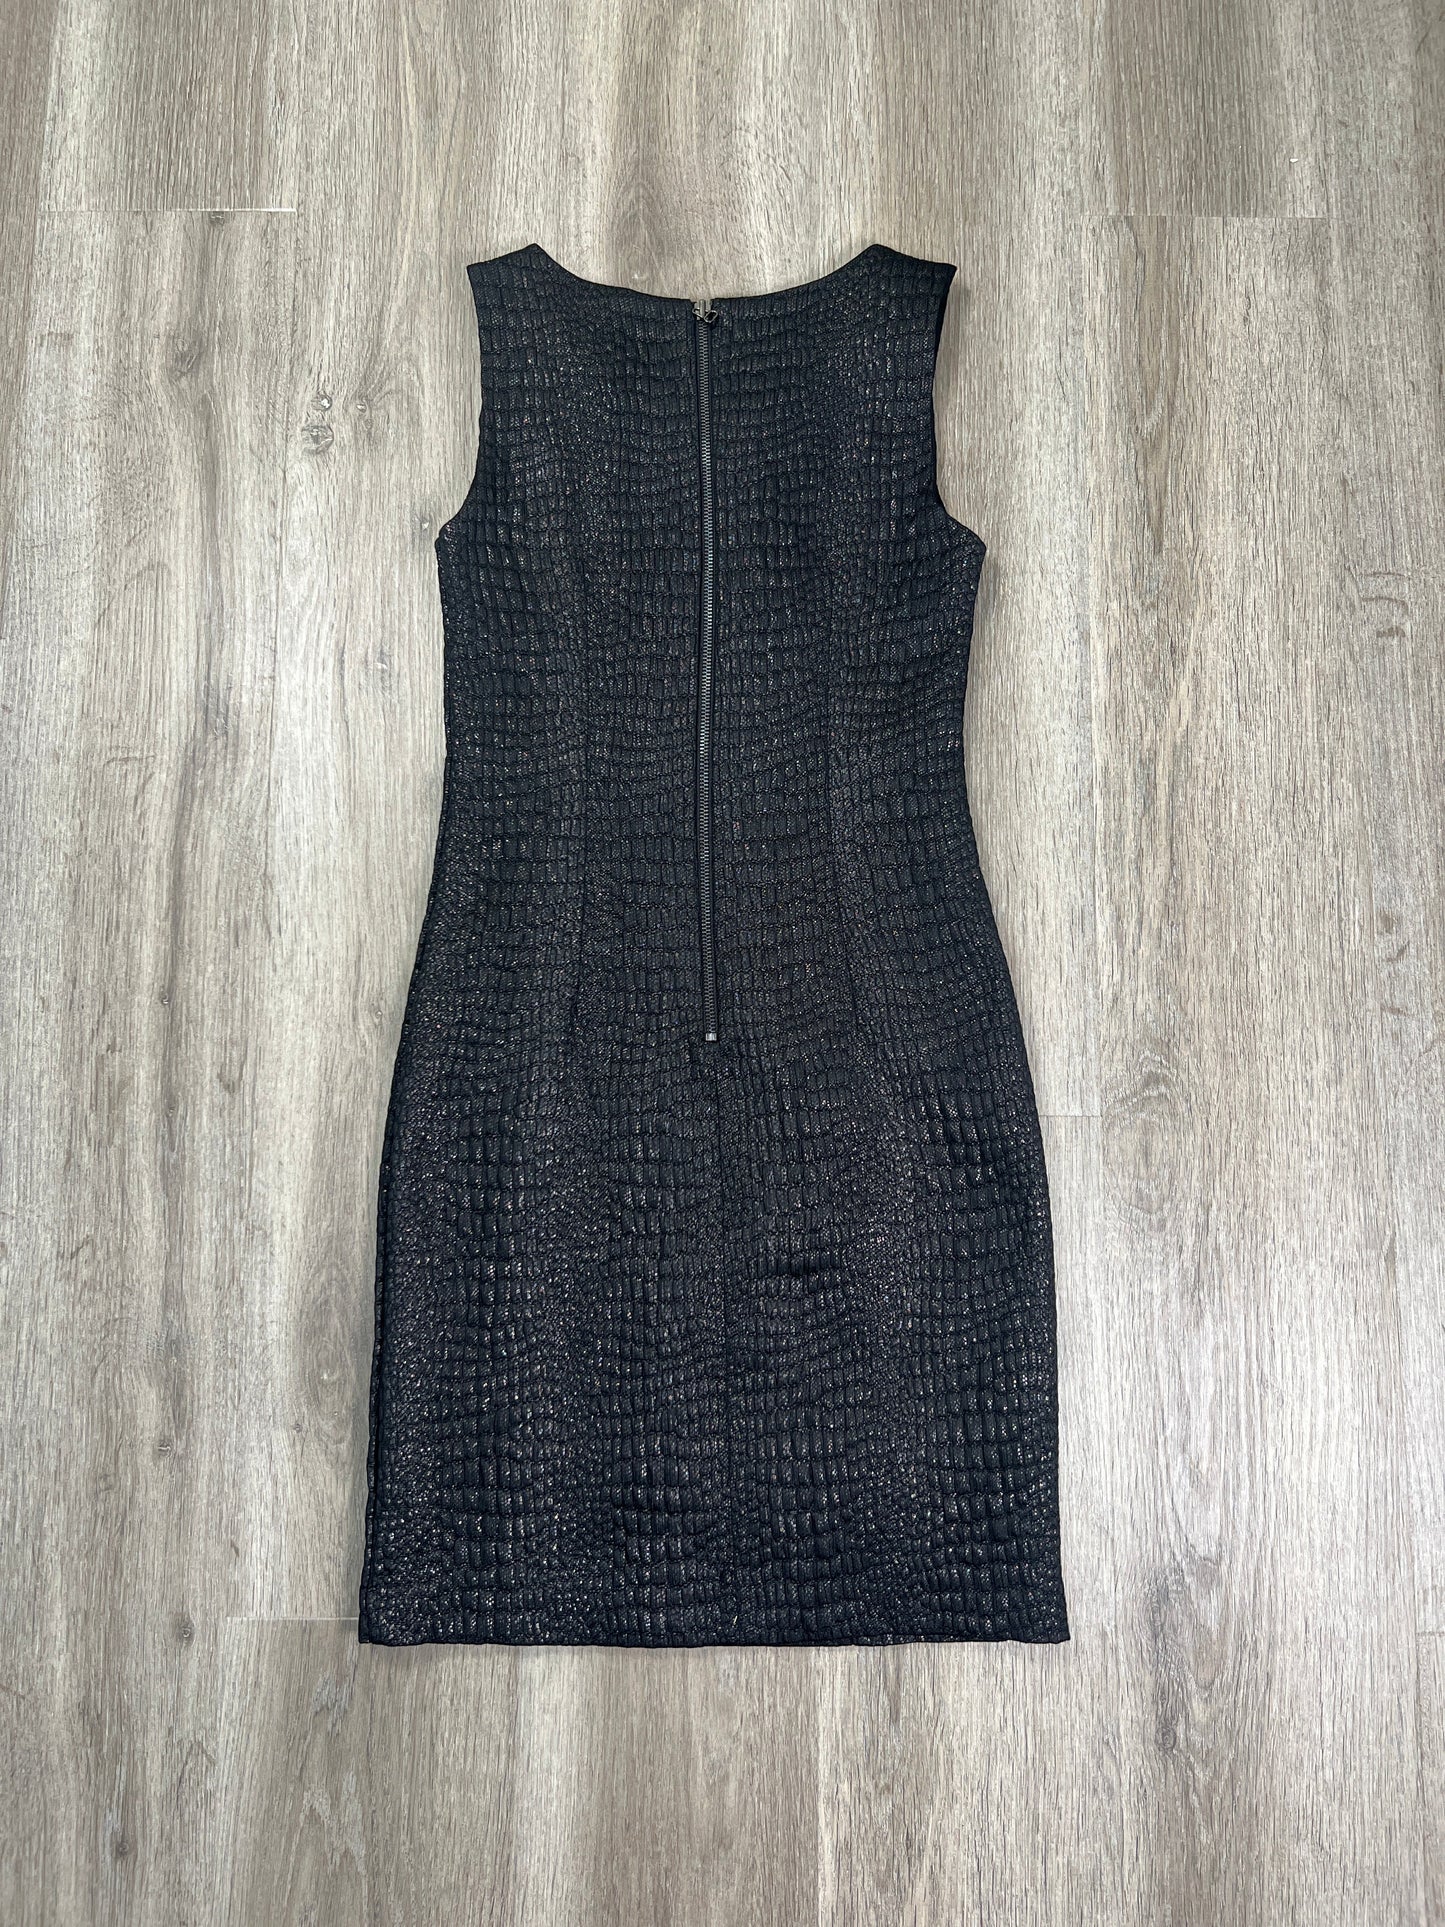 Dress Party Short By Kenneth Cole  Size: S